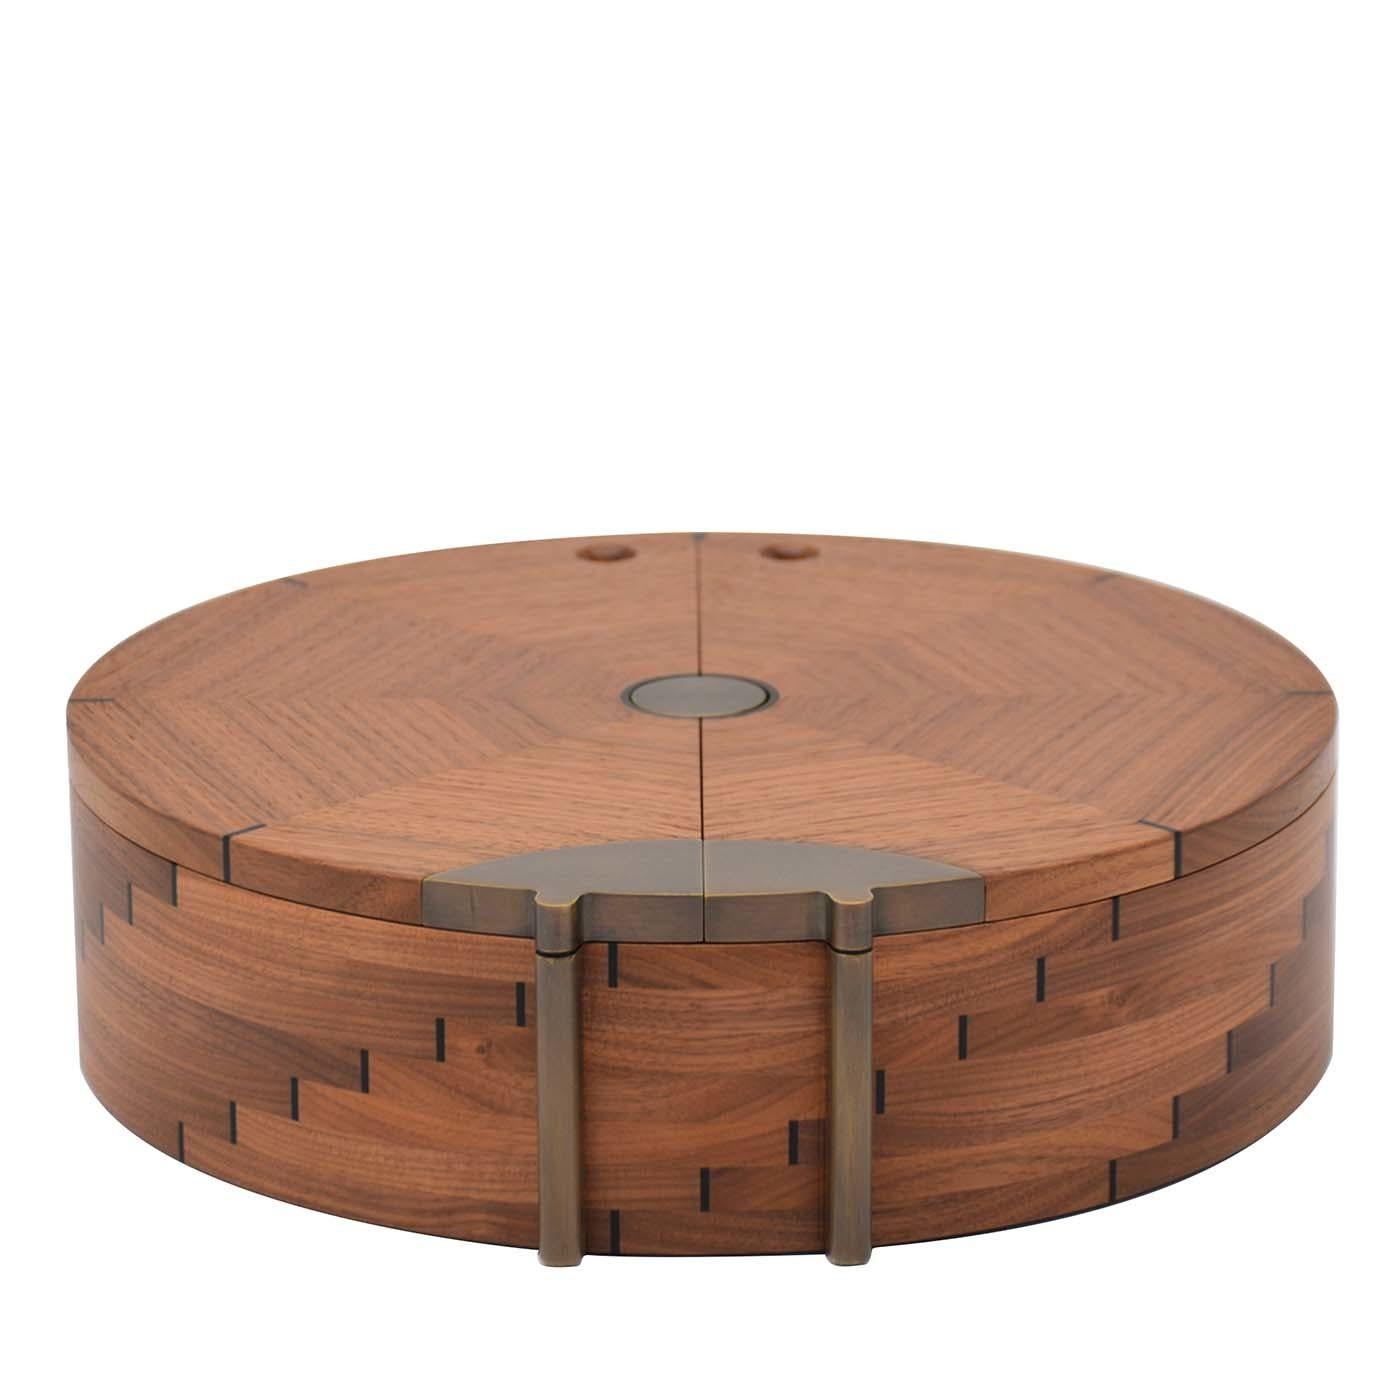 This charming box is handcrafted of walnut with a shape inspired by the ladybug, symbol of good fortune and prosperity. The round base showcases dovetail-joint inserts of ebony that form an eye-catching geometric pattern of ascending stairs. The lid